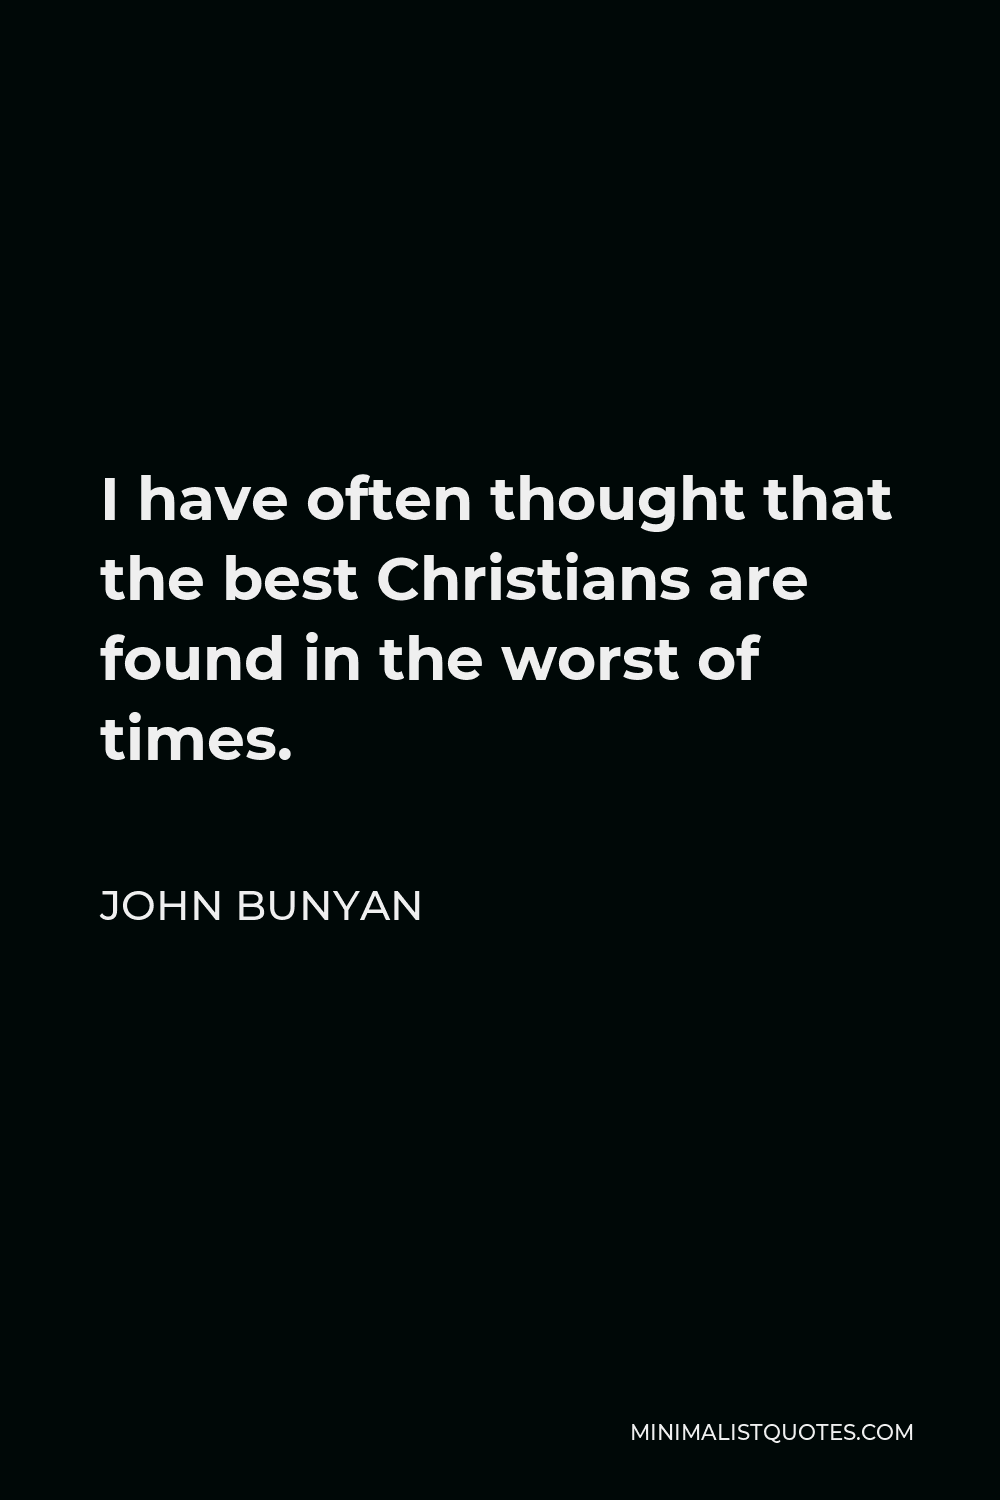 John Bunyan Quote - I have often thought that the best Christians are found in the worst of times.